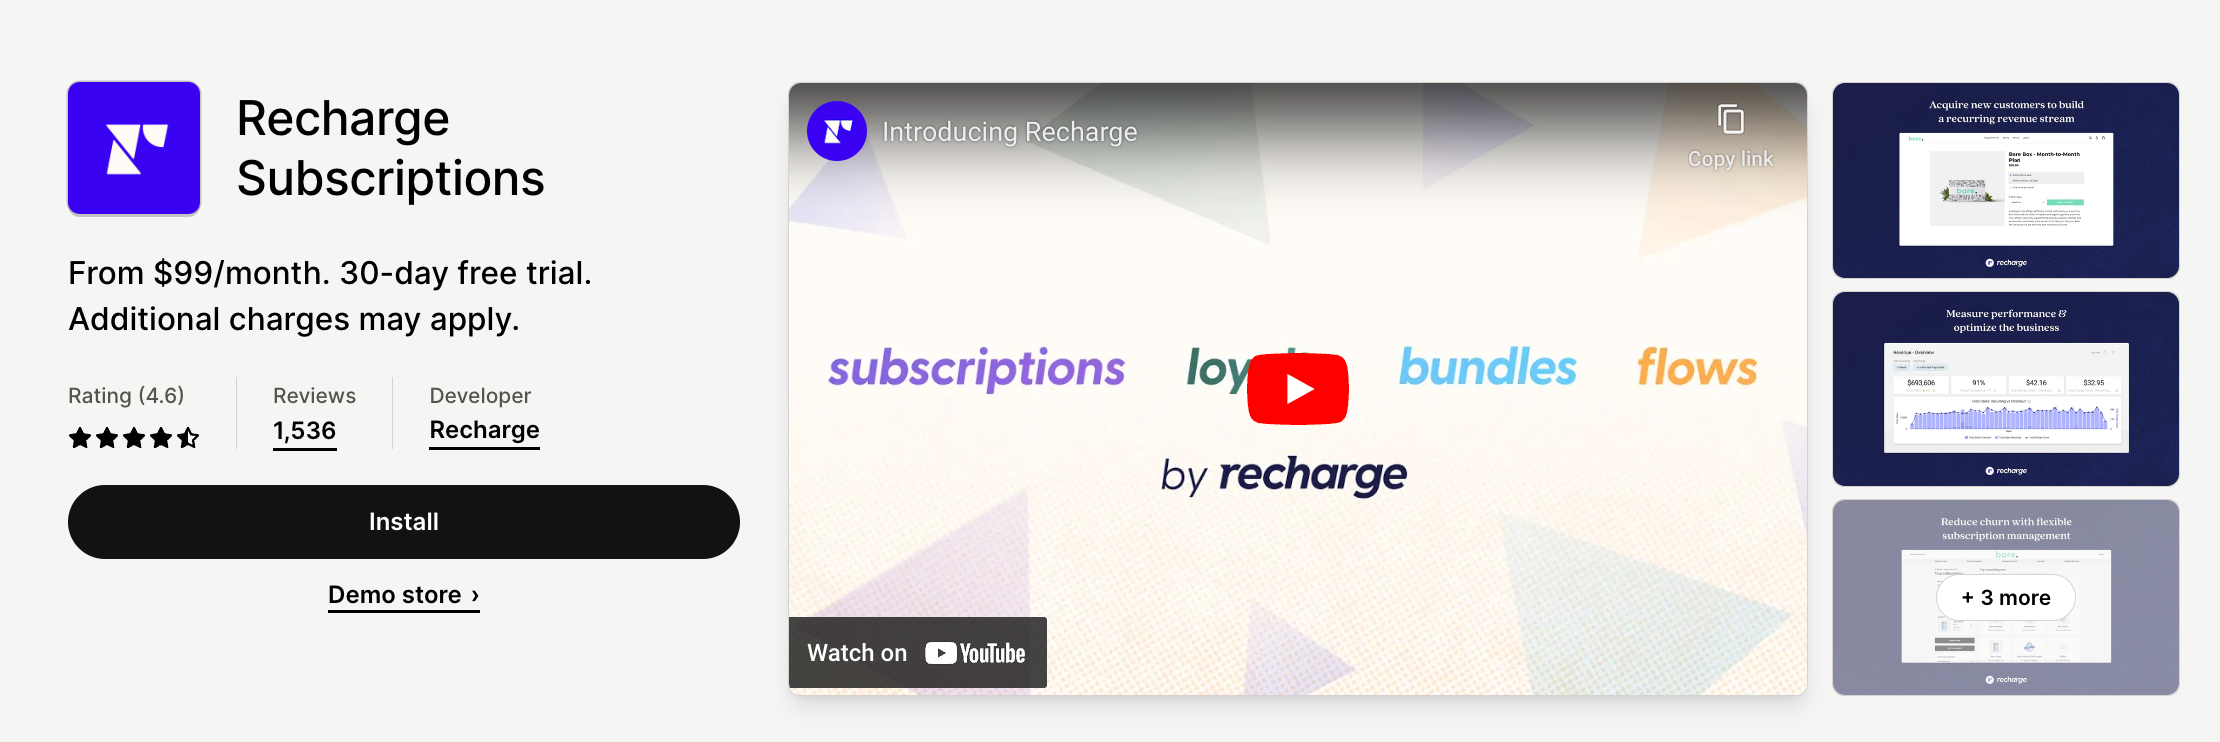 Recharge Subscriptions